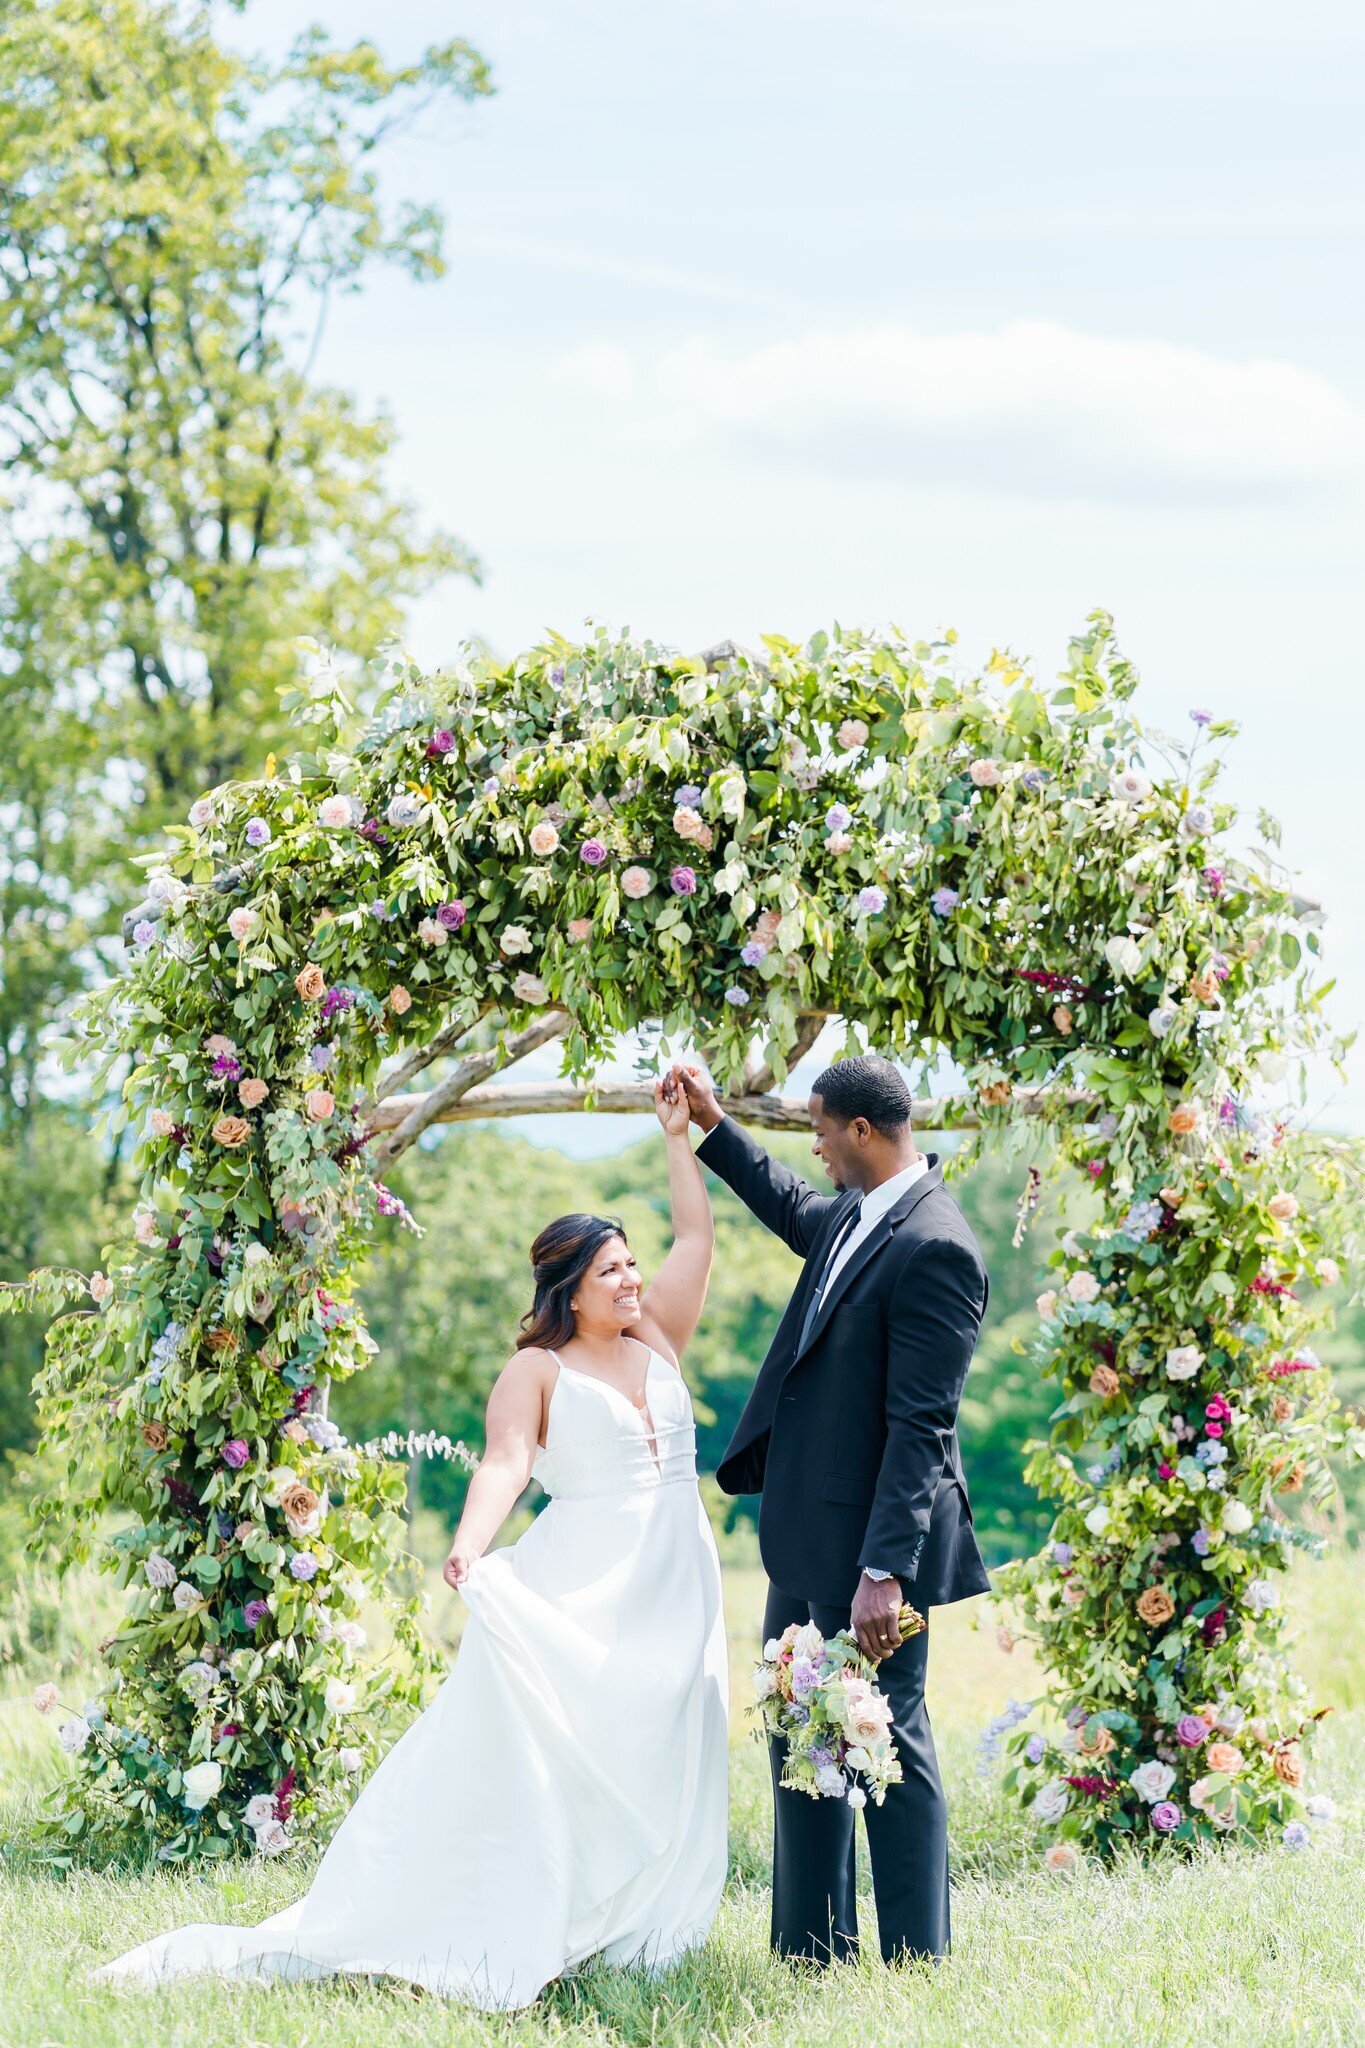 Mayfair Farm Wedding Ceremony with bride and groom dancing